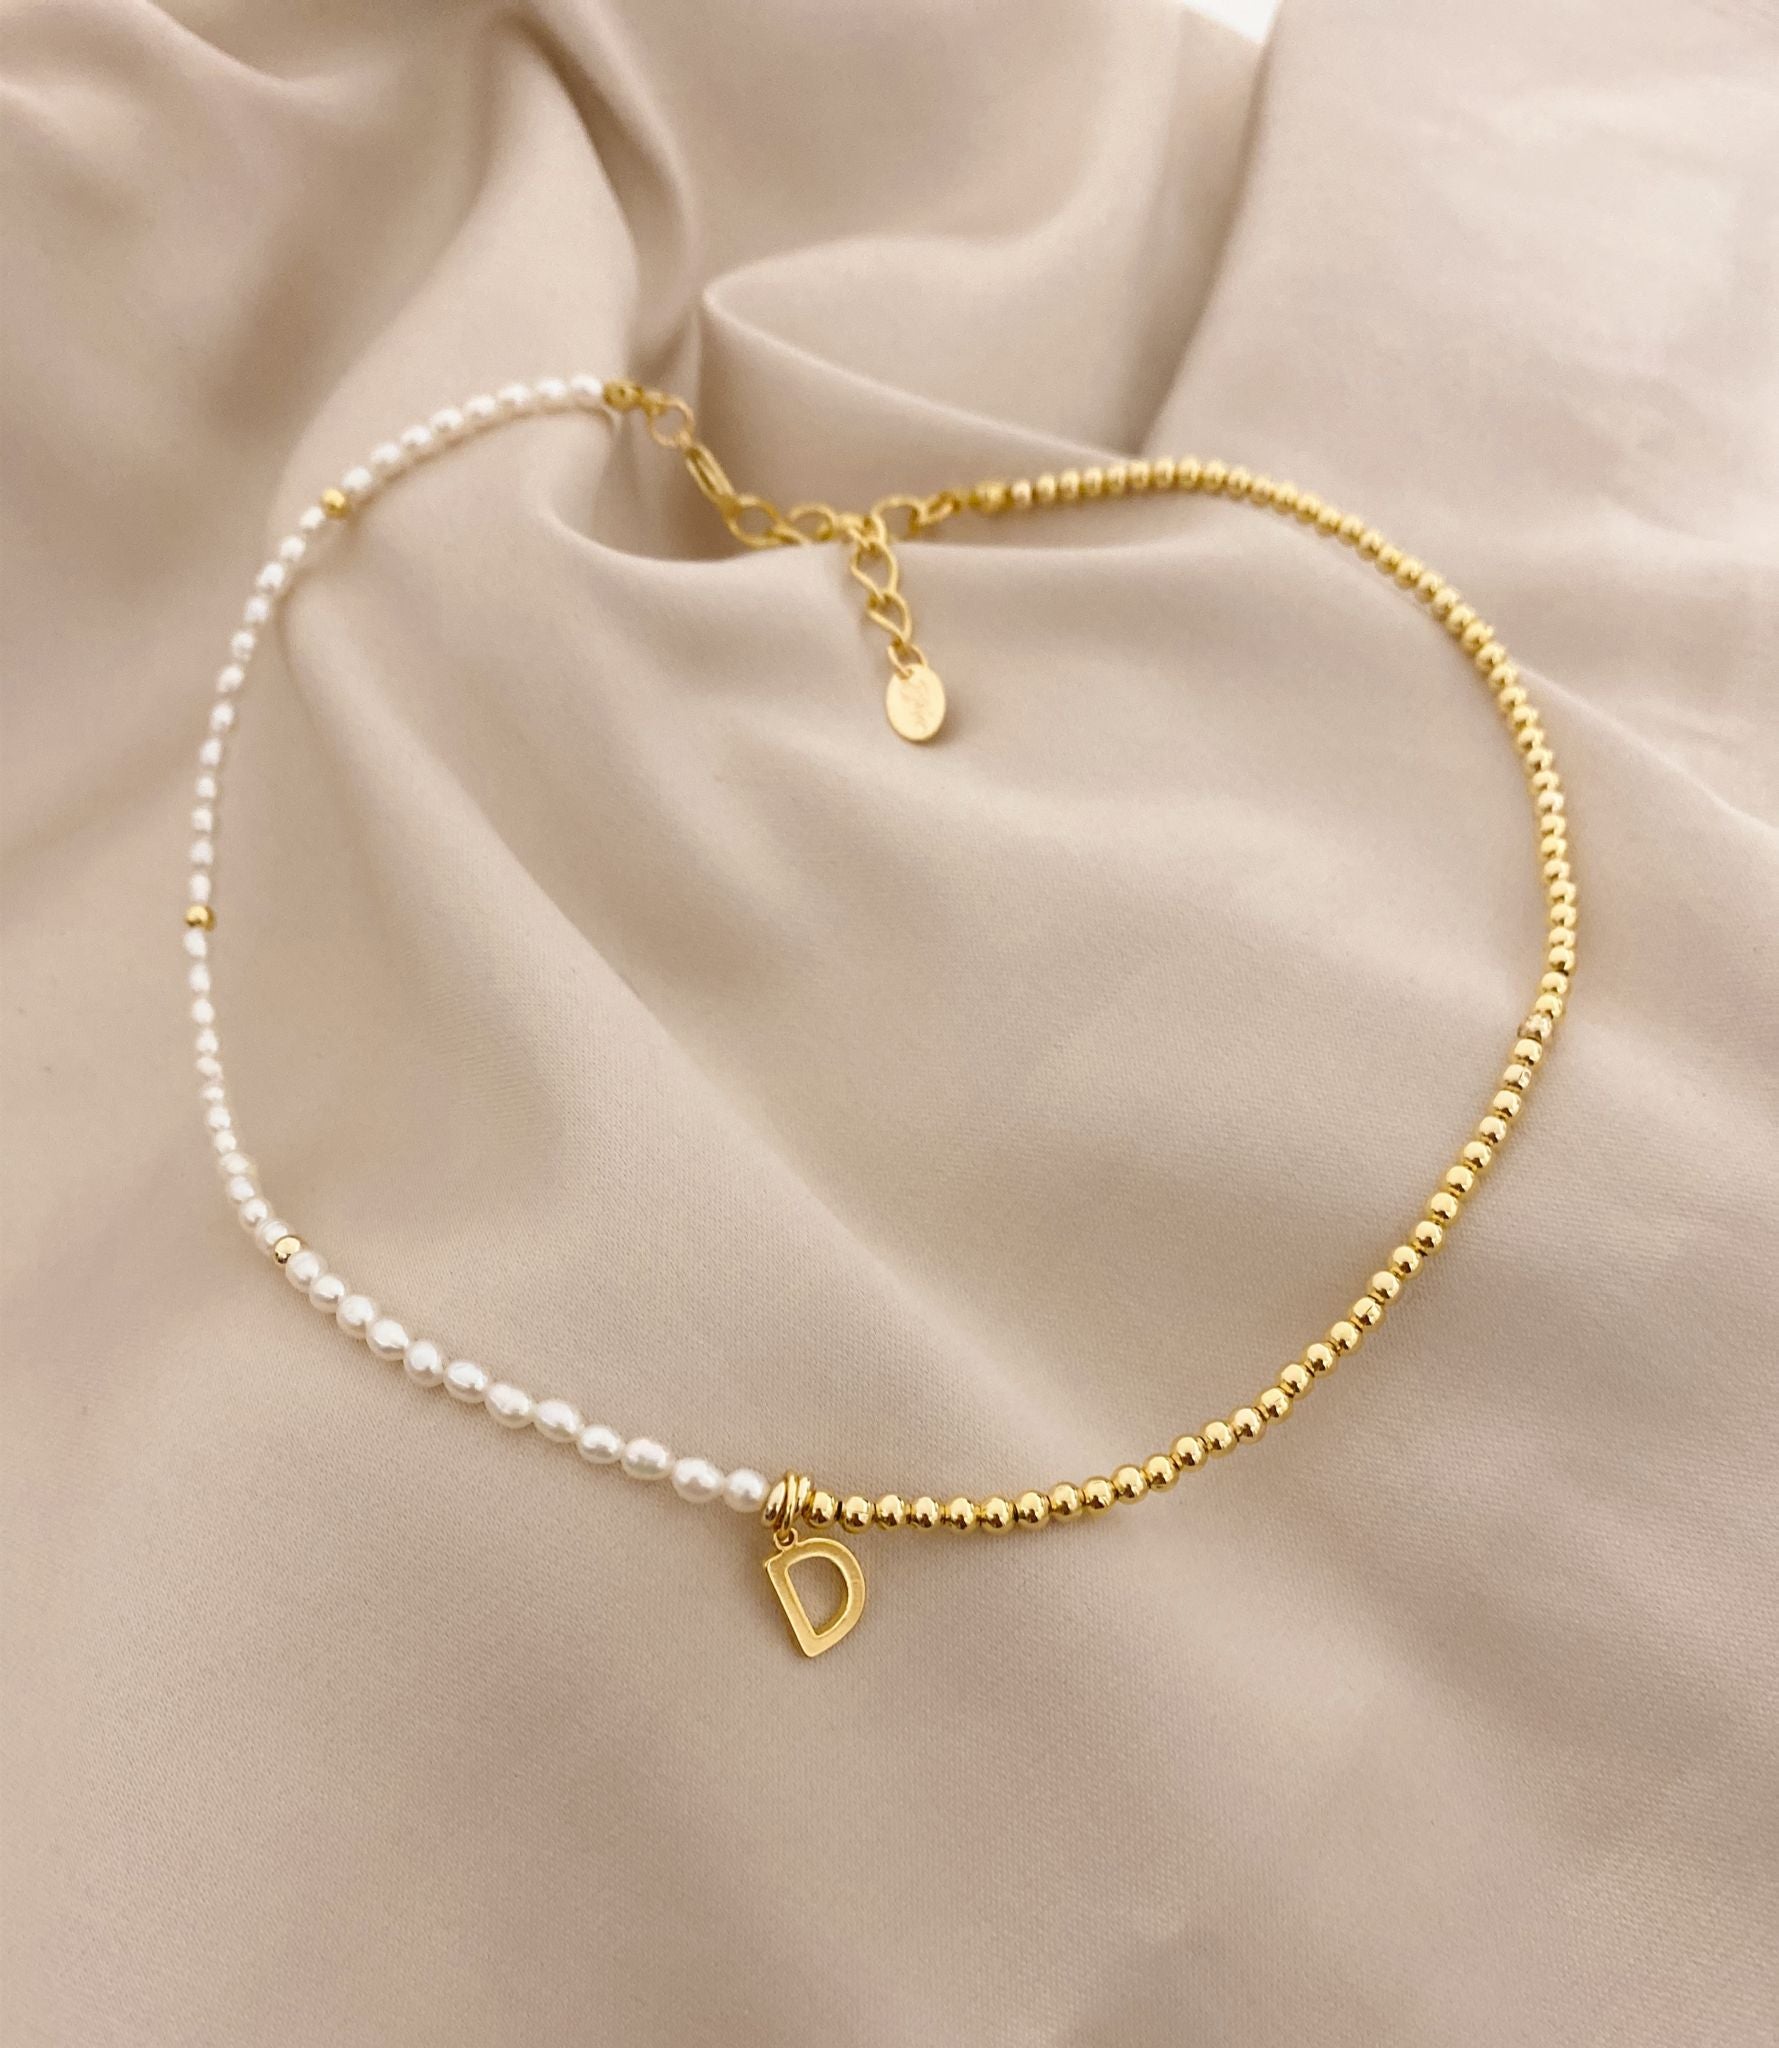 Half Pearl and Gold Necklace with Initial